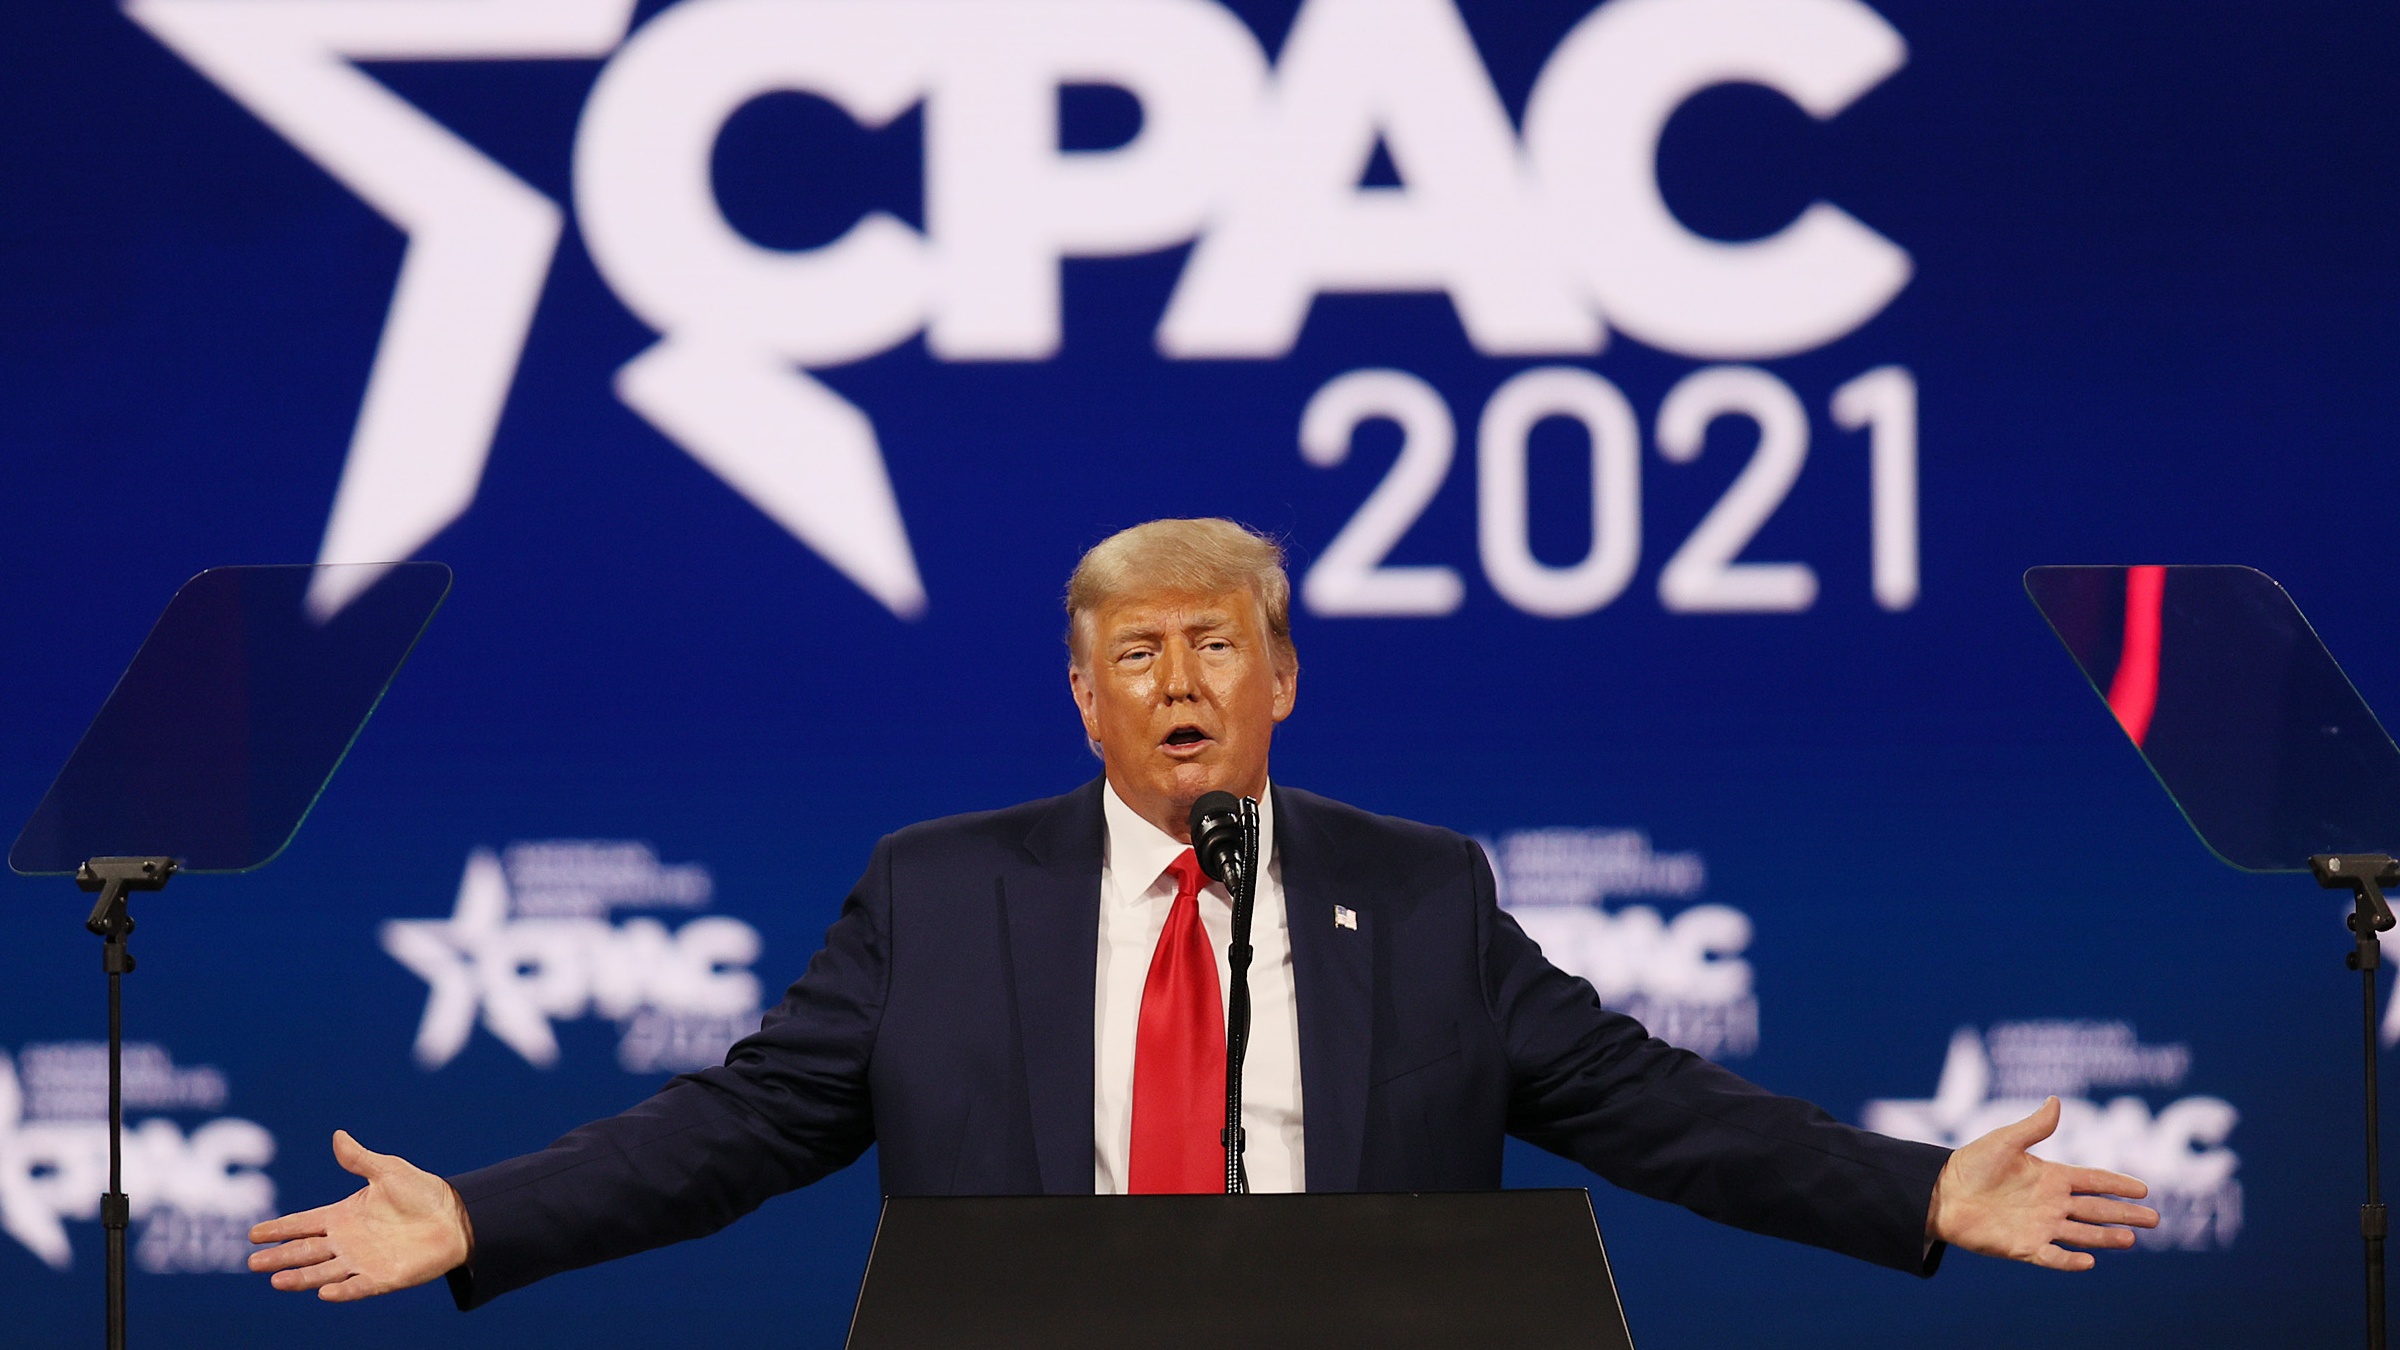 Donald Trump addresses the 2021 Conservative Political Action Conference at the Hyatt Regency Orlando hotel in Florida